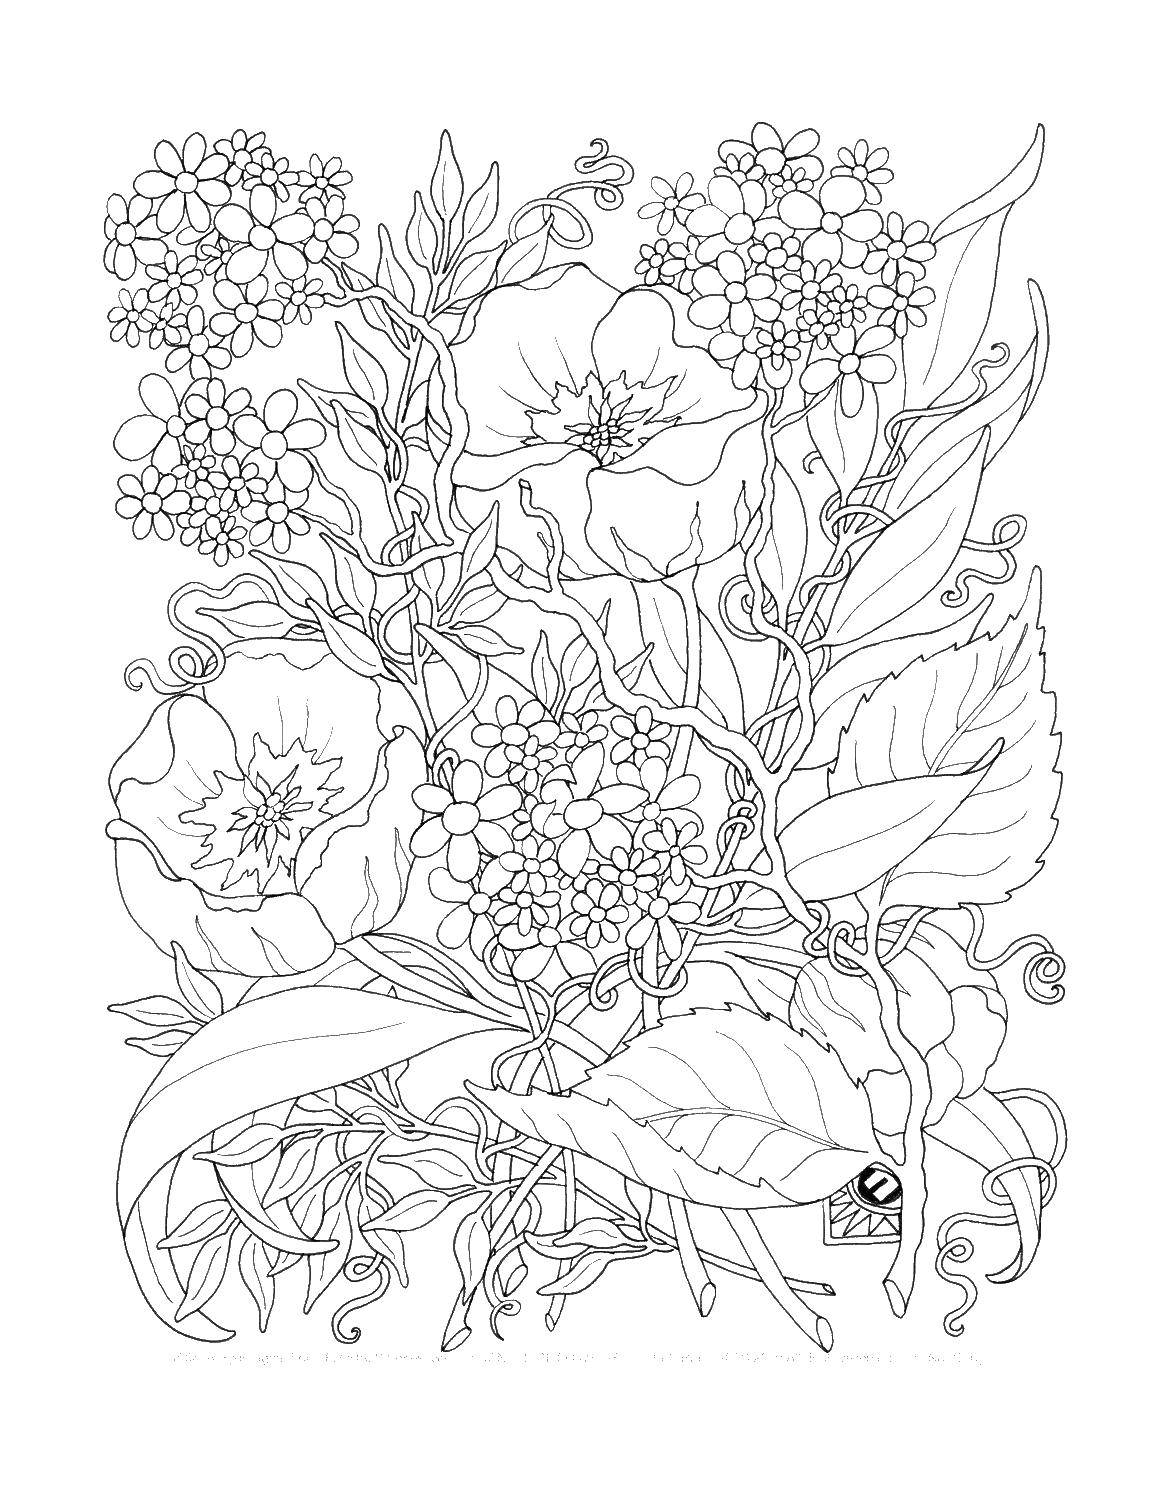 Coloring A bouquet of pretty flowers. Category flowers. Tags:  Flowers.